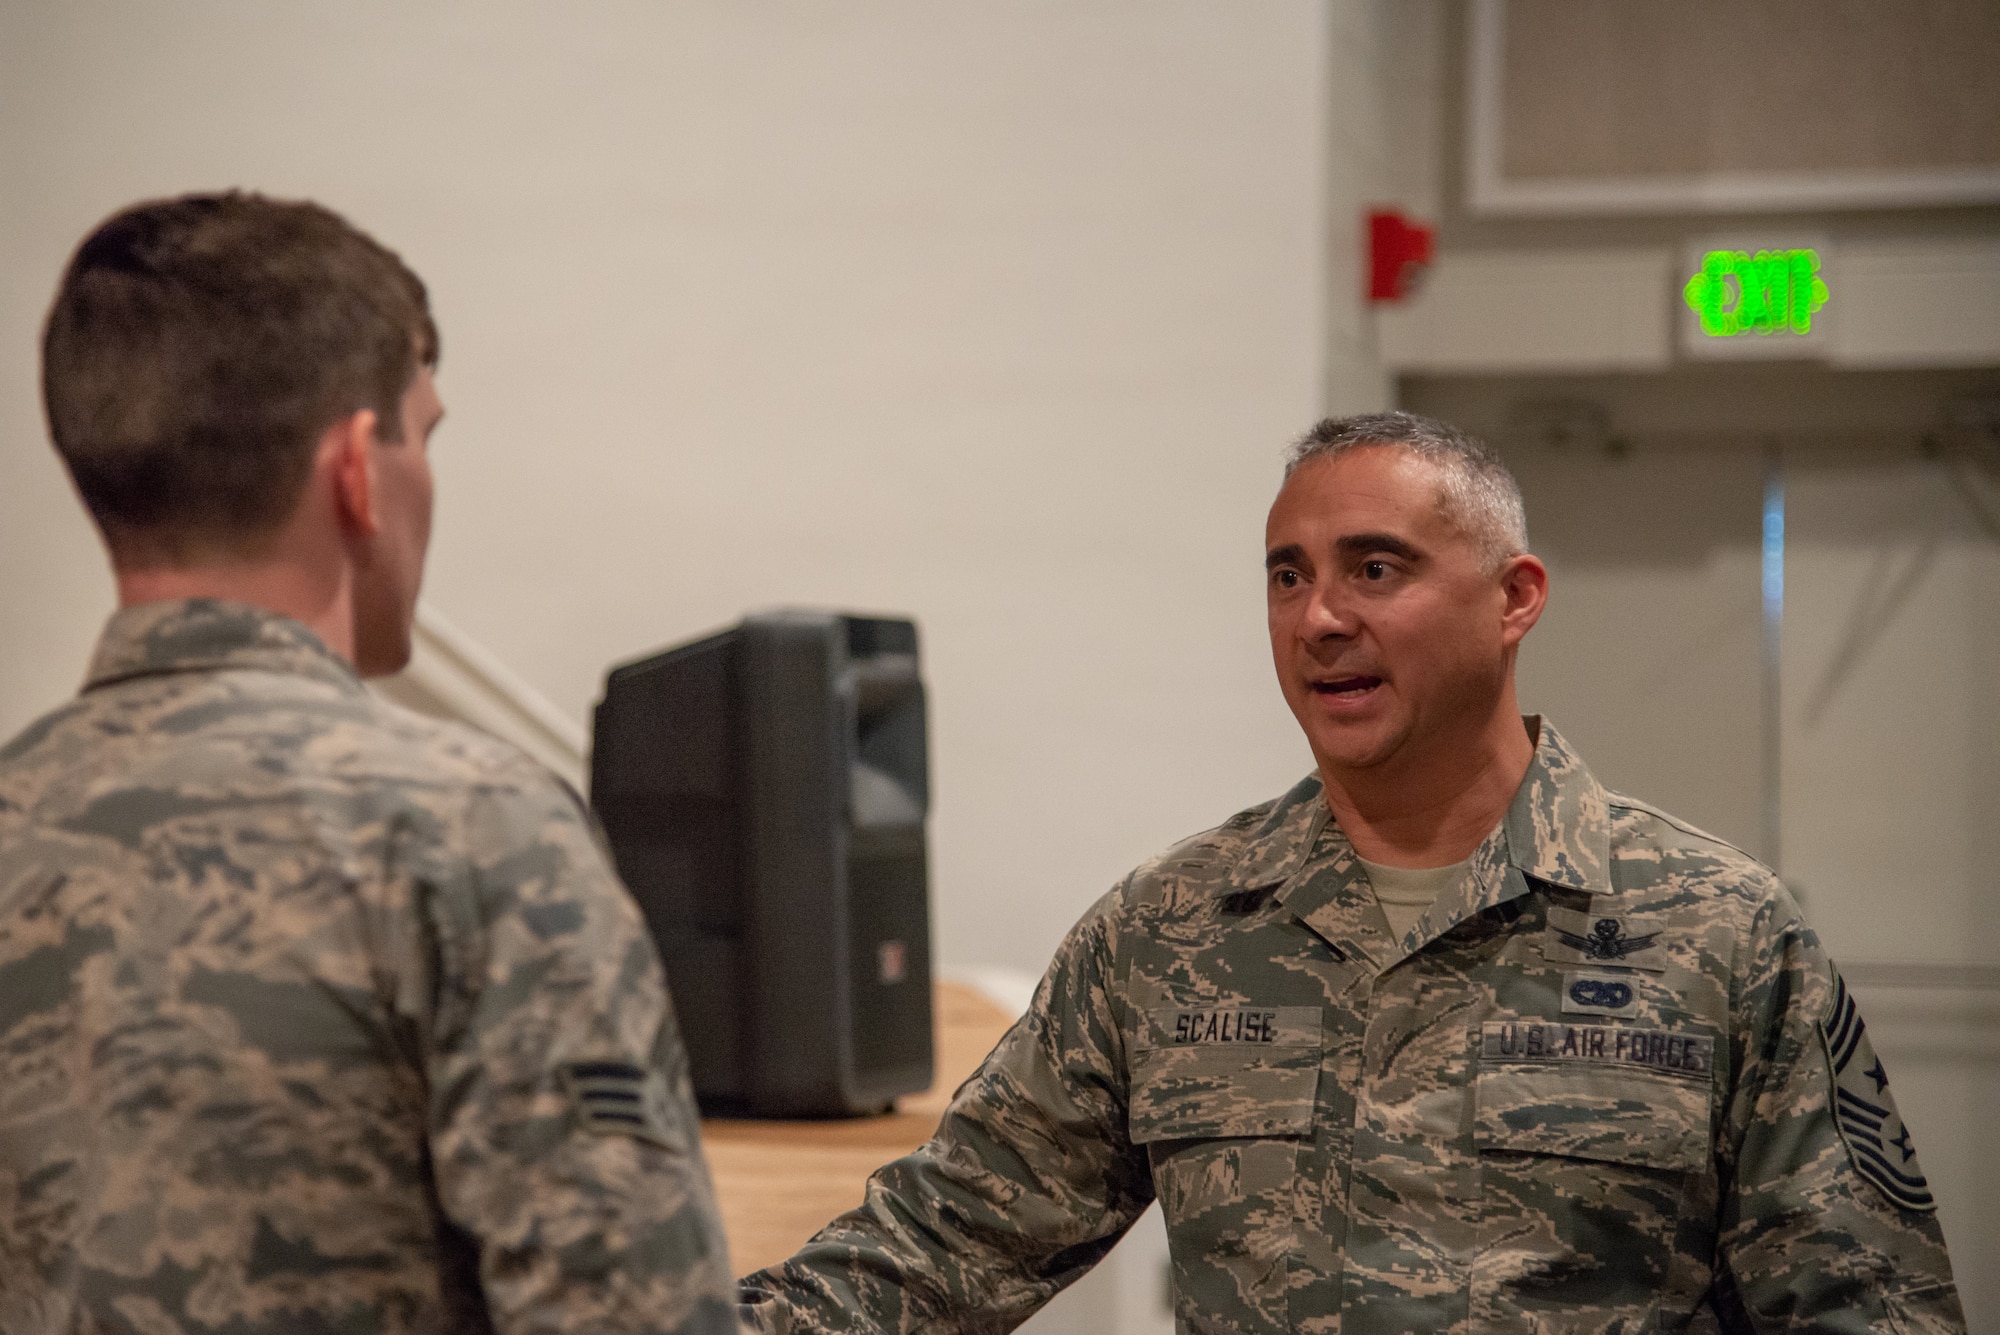 Chief Master Sgt. Kahn Scalise, the 302nd Airlift Wing command chief, speaks with Senior Airman Andrew Peeples, a 302nd Maintenance Squadron ammunition specialist, in the base theater June 1, 2019 at Peterson Air Force Base, Colorado.